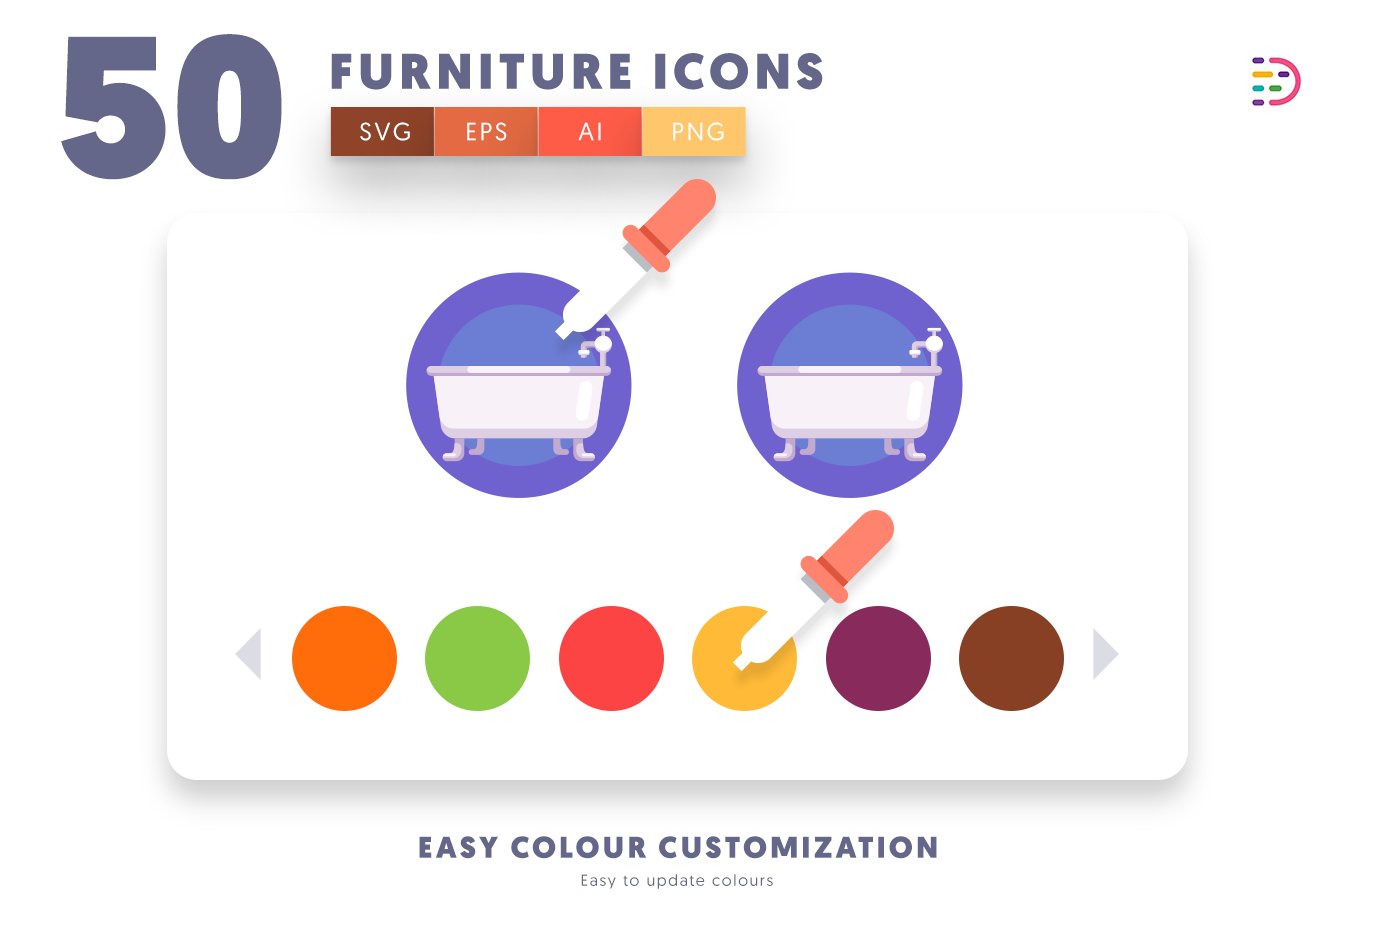 furniture icons cover 7 102